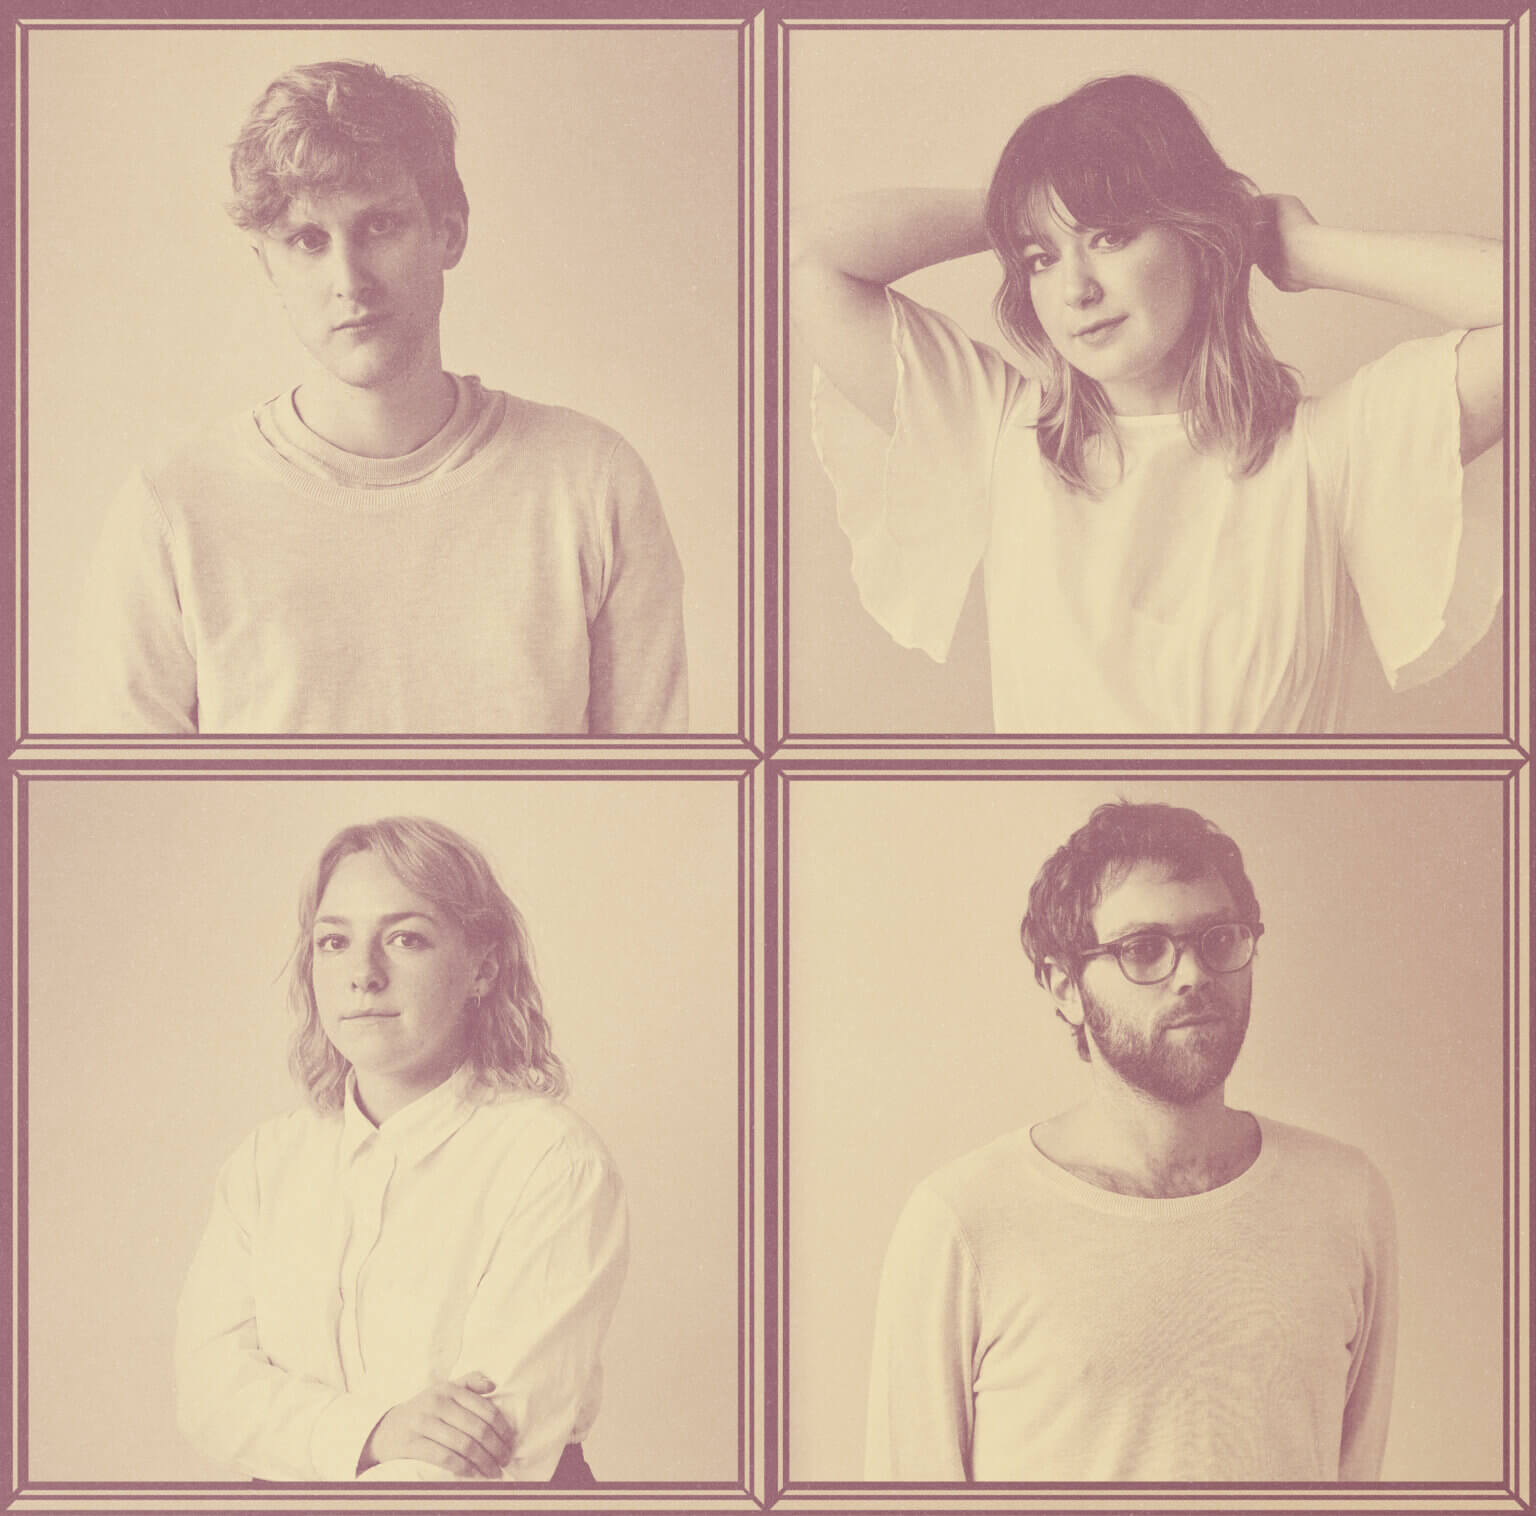 "Mona Lisa" by New Zealand band Yumi Zouma is Northern Transmissions Song of the Day